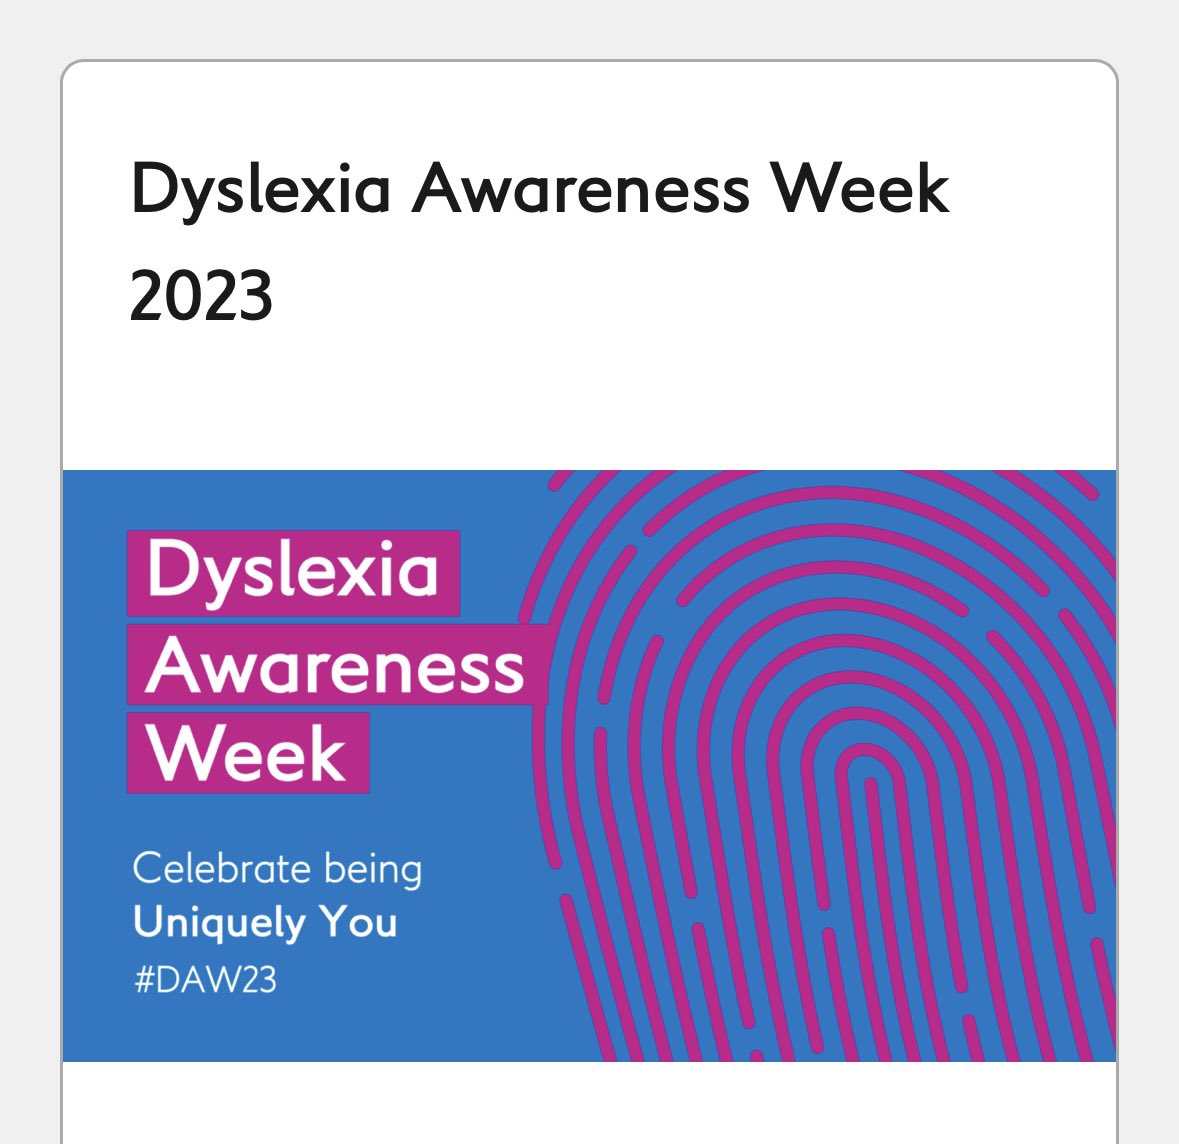 Celebrating #Dyslexia #Awareness Week #DAW2023. Let’s embrace difference, make invisible visible & recognise the unique talents people living with dyslexia bring #neurodiversity #hiddendisabilities @NHSBartsHealth @SCSTcouncil @WeHCScientists @BartsAbility